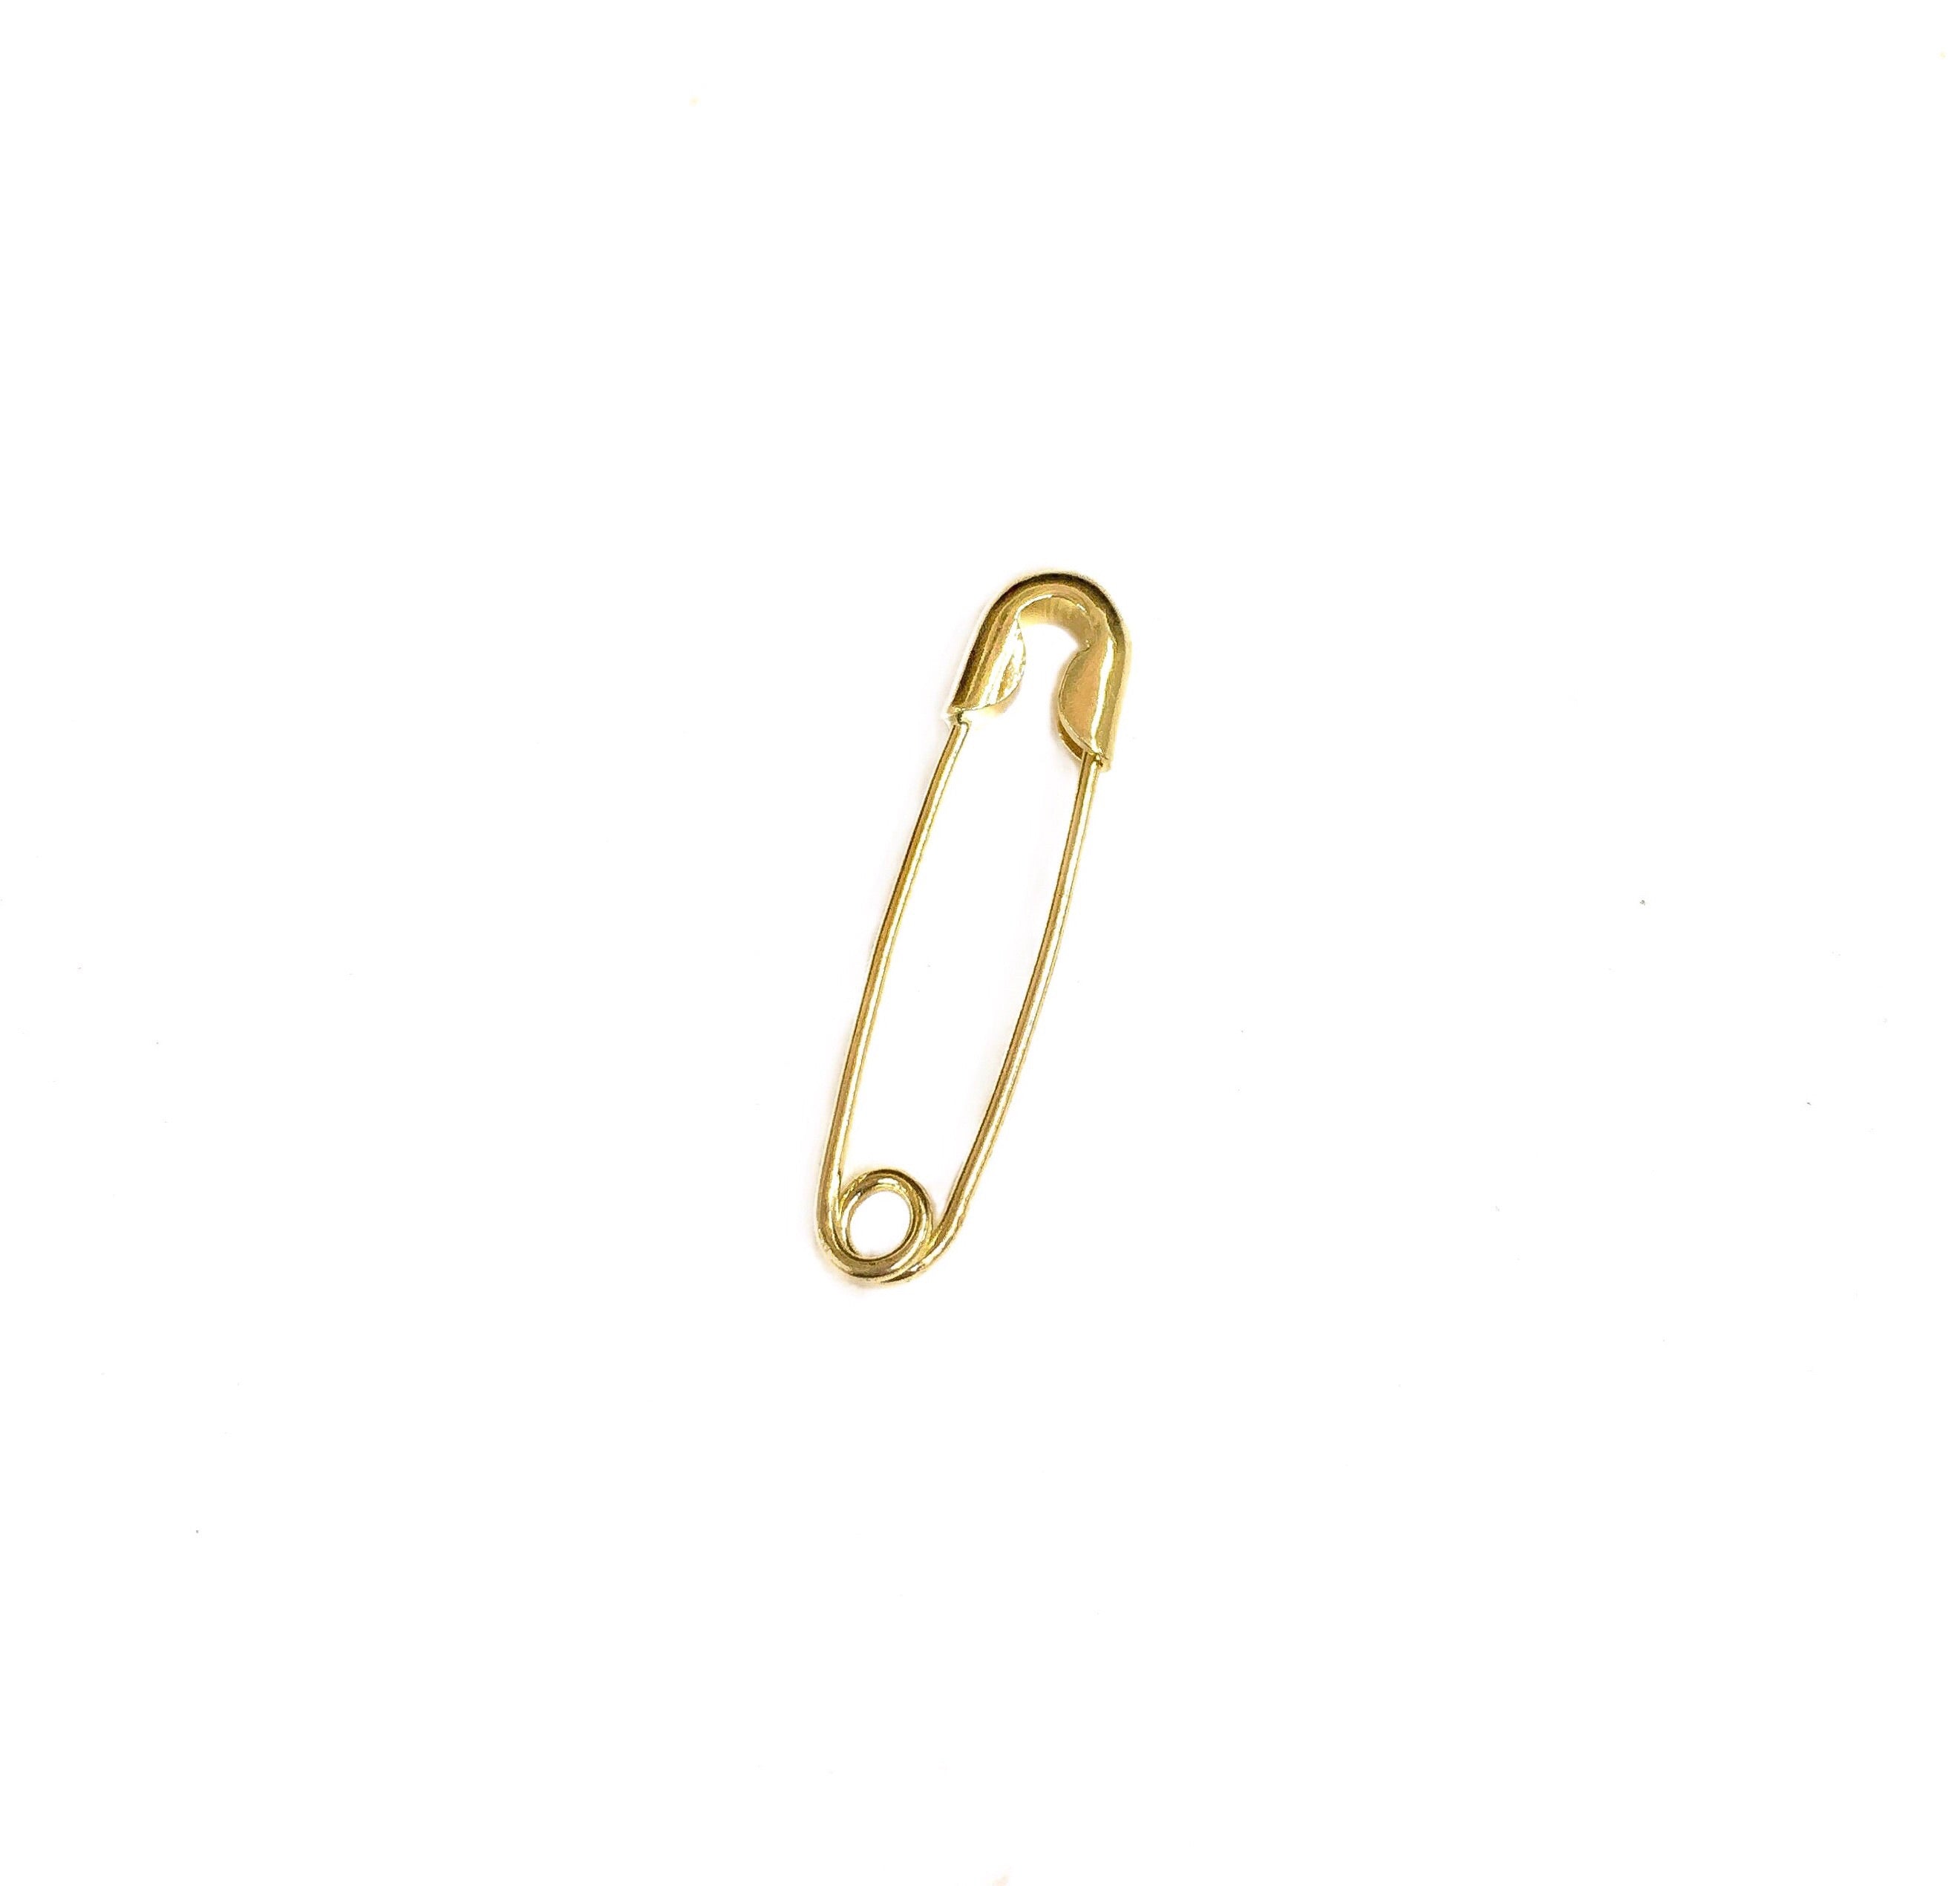 14K YELLOW GOLD SAFETY PIN EARRING